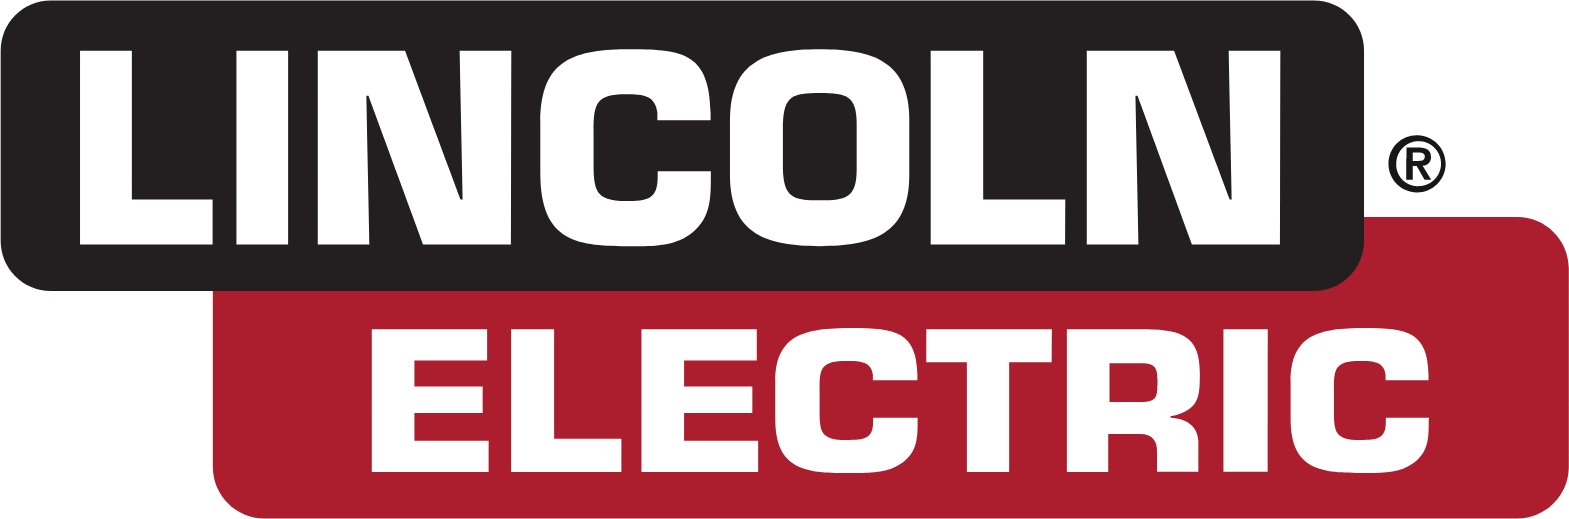 Lincoln Electric
 Logo (transparentes PNG)